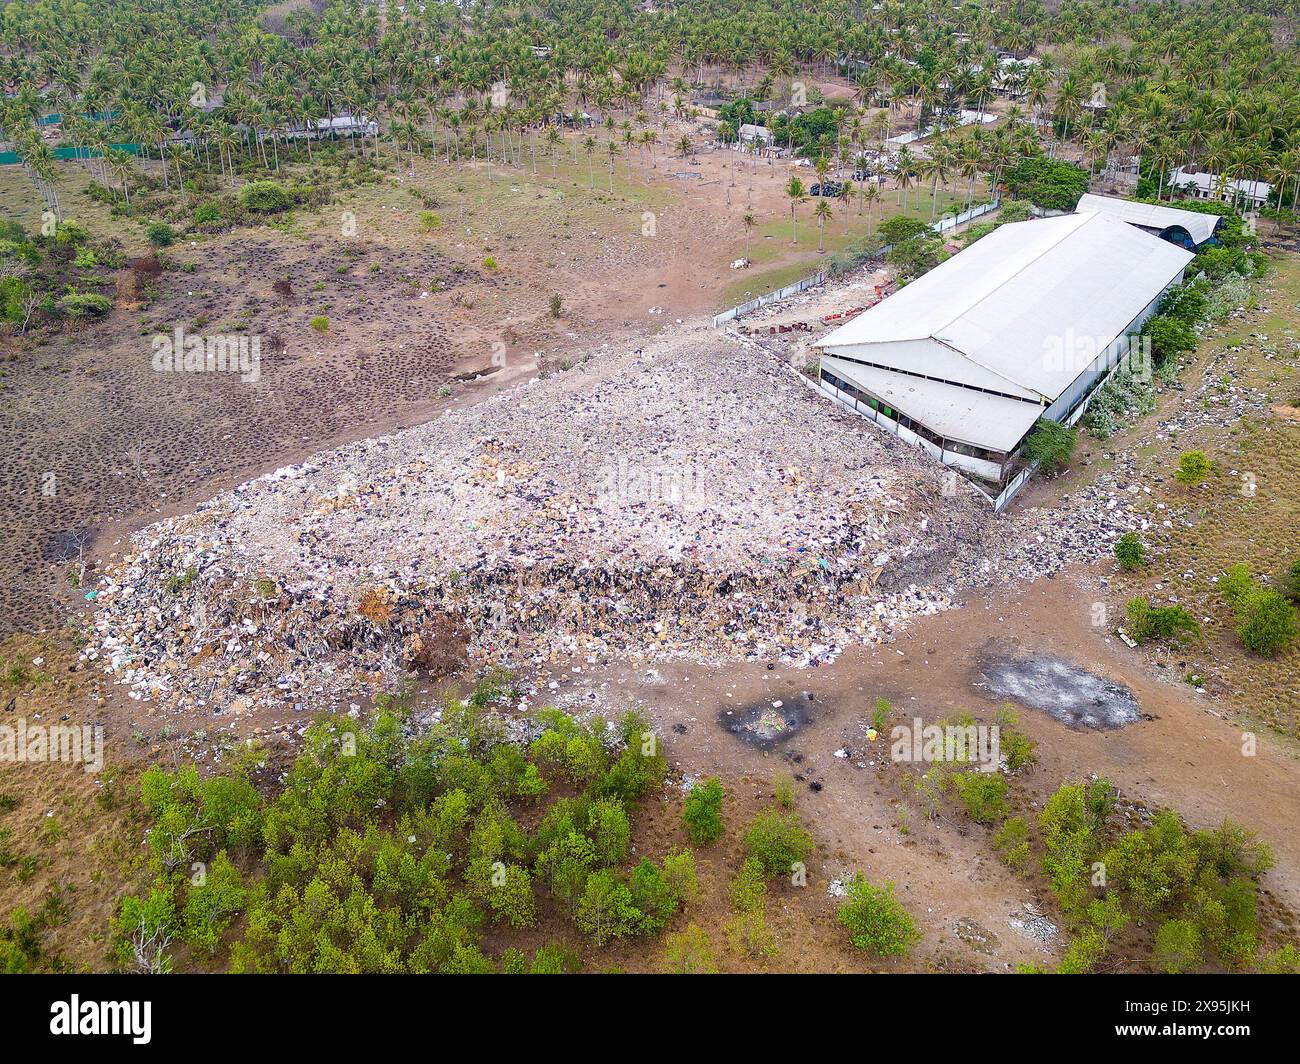 Aerial view of a huge, open air garbage dump full of plastic and unsorted refuse Stock Photo